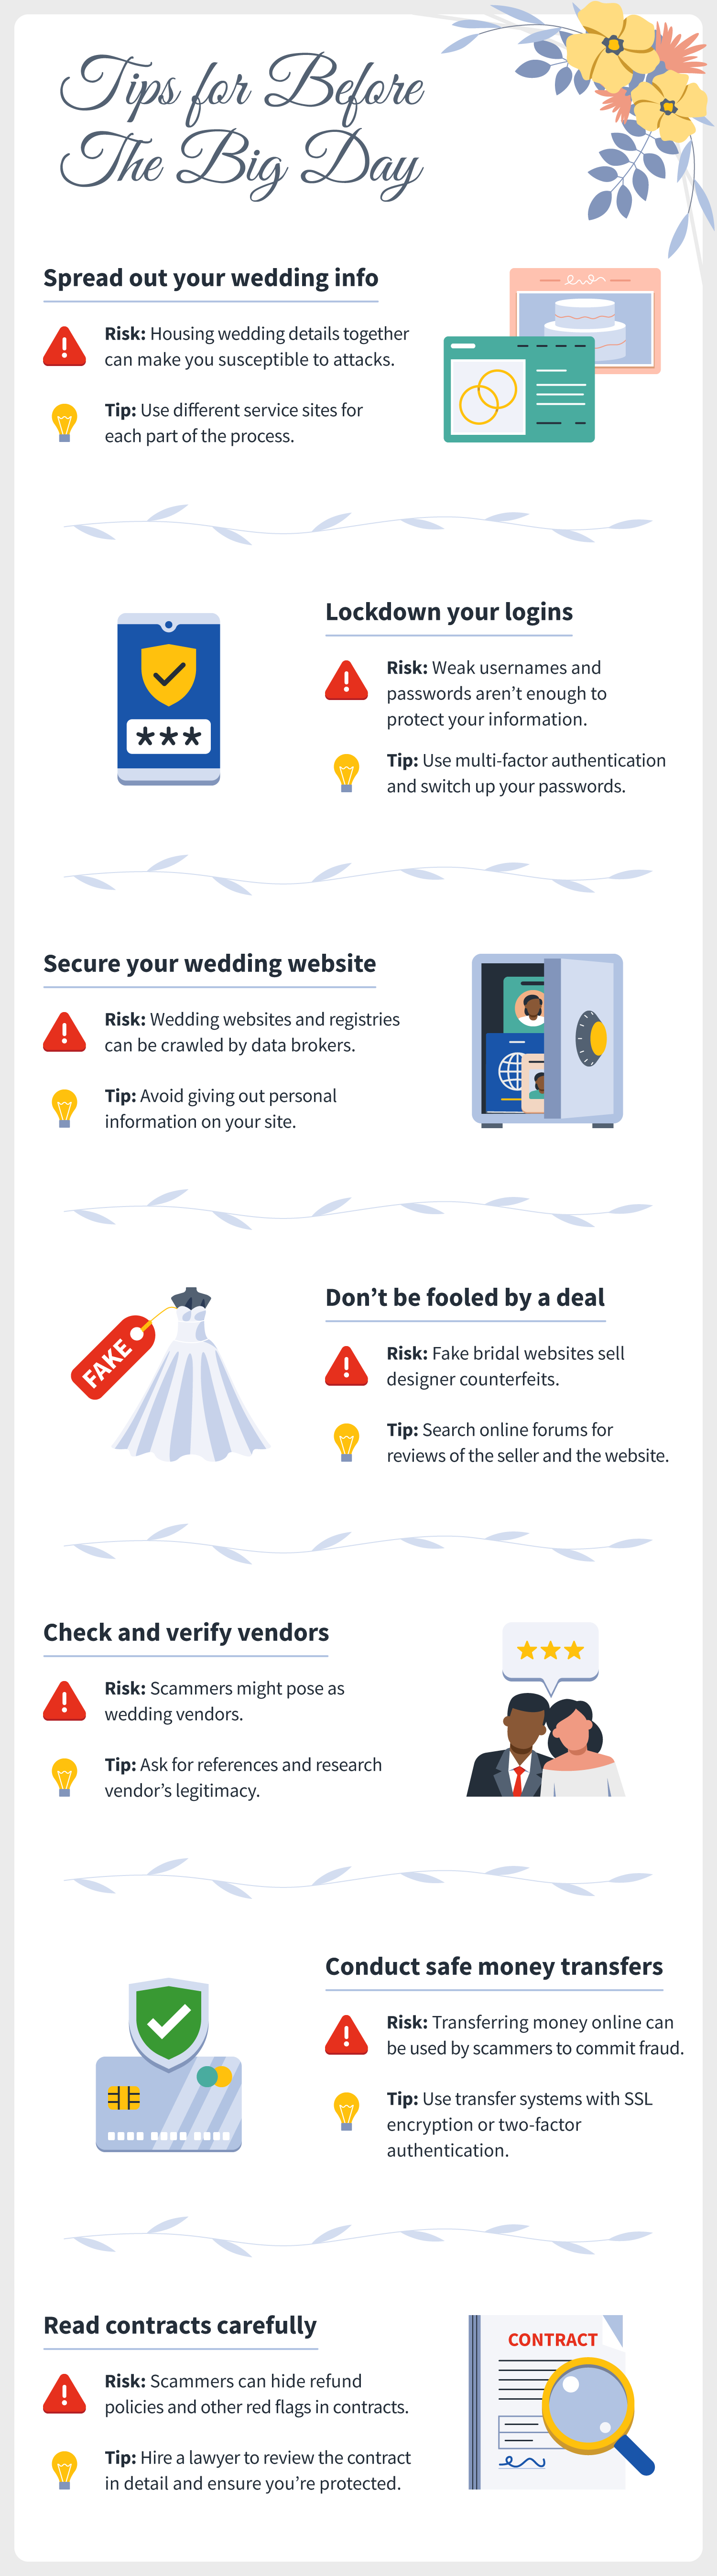 multiple wedding sites housing details, secured logins and wedding websites, safe money transfers and thoroughly read contracts indicating cyber-safe tips for planning a wedding